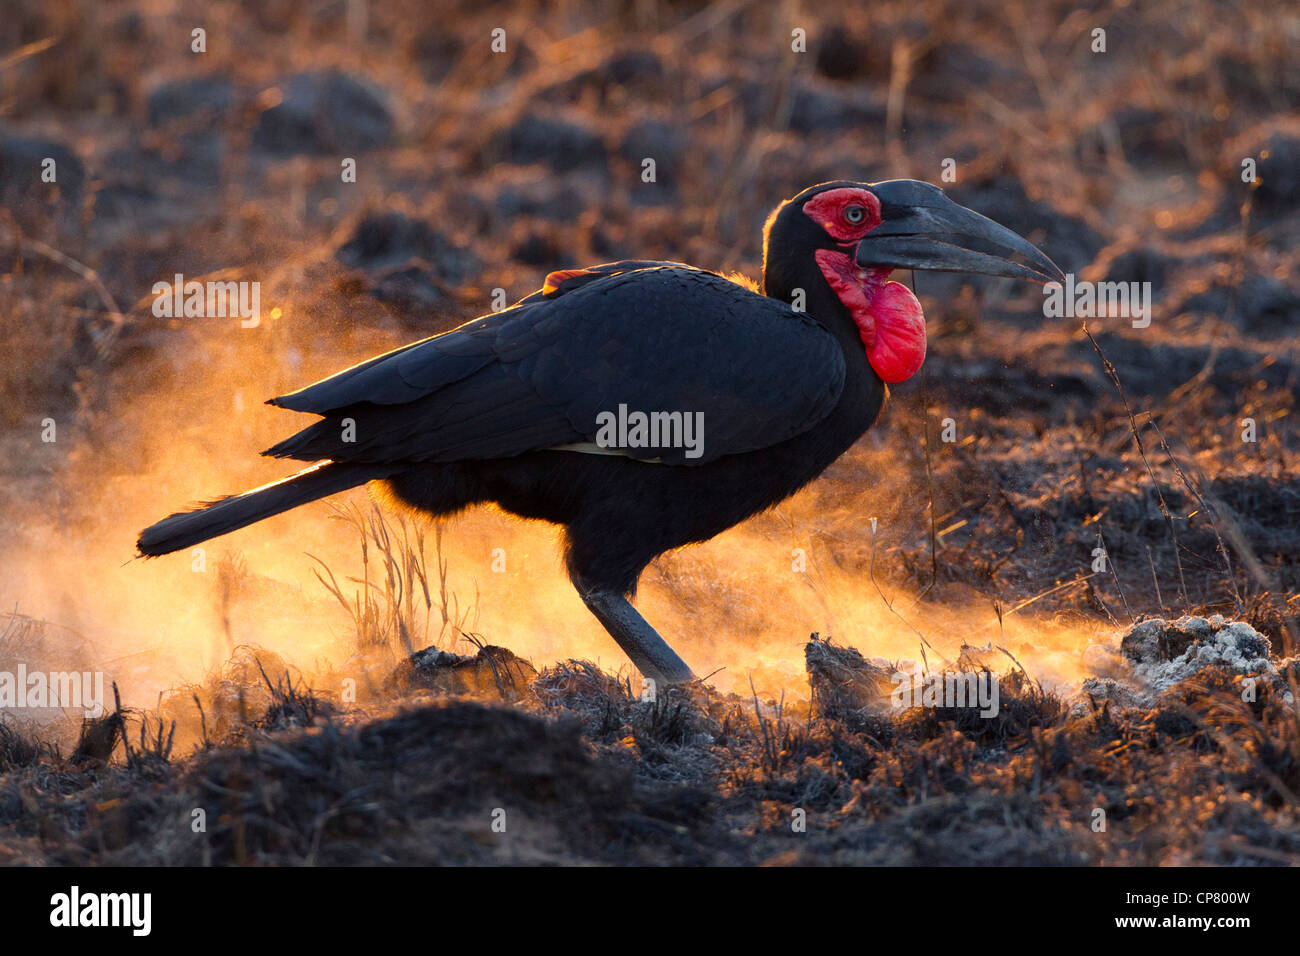 Southern Ground Hornbill (Bucorvus leadbeateri) searching for food in Soouth Africa's Kruger Park Stock Photo